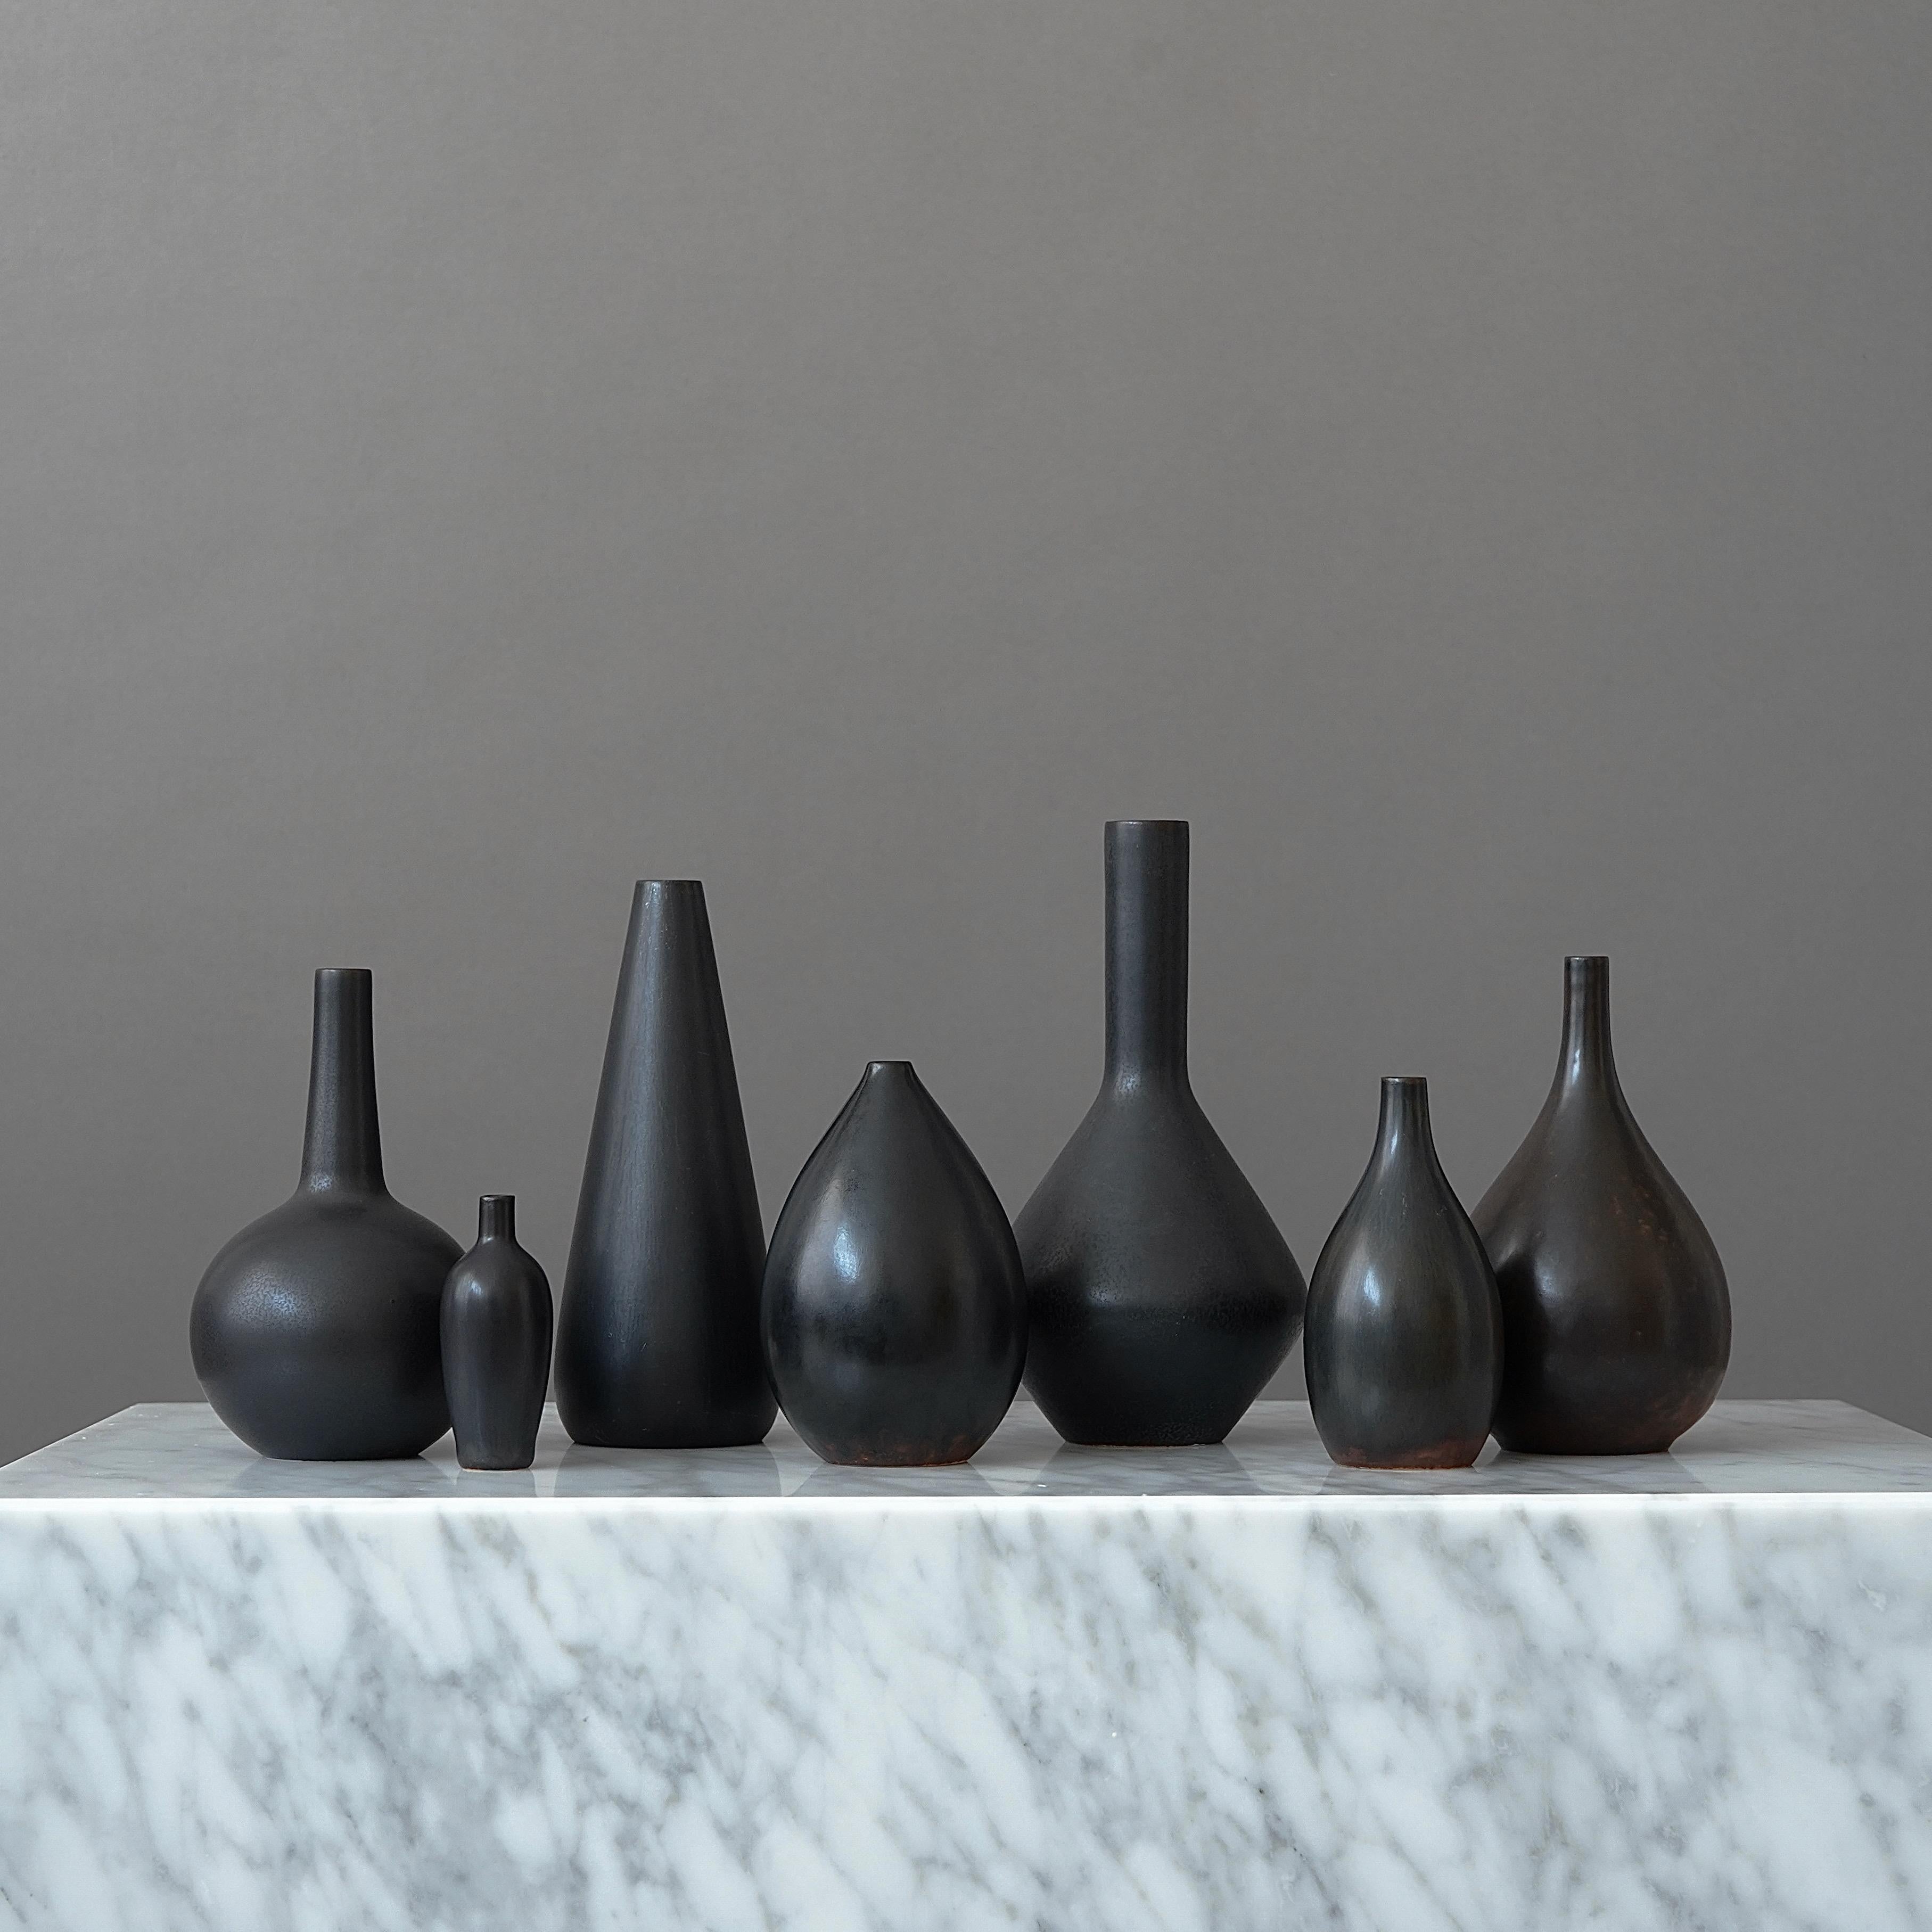 Set of 7 beautiful stoneware vases with amazing black-brown glaze.
Designed by Carl-Harry Stålhane at Rörstrand, Sweden, 1950s.

Excellent condition. Signed 'CHS' and makers mark 'R'.
The tallest is 16 cm (6.3 in.) and the smallest is 7 cm (2.76